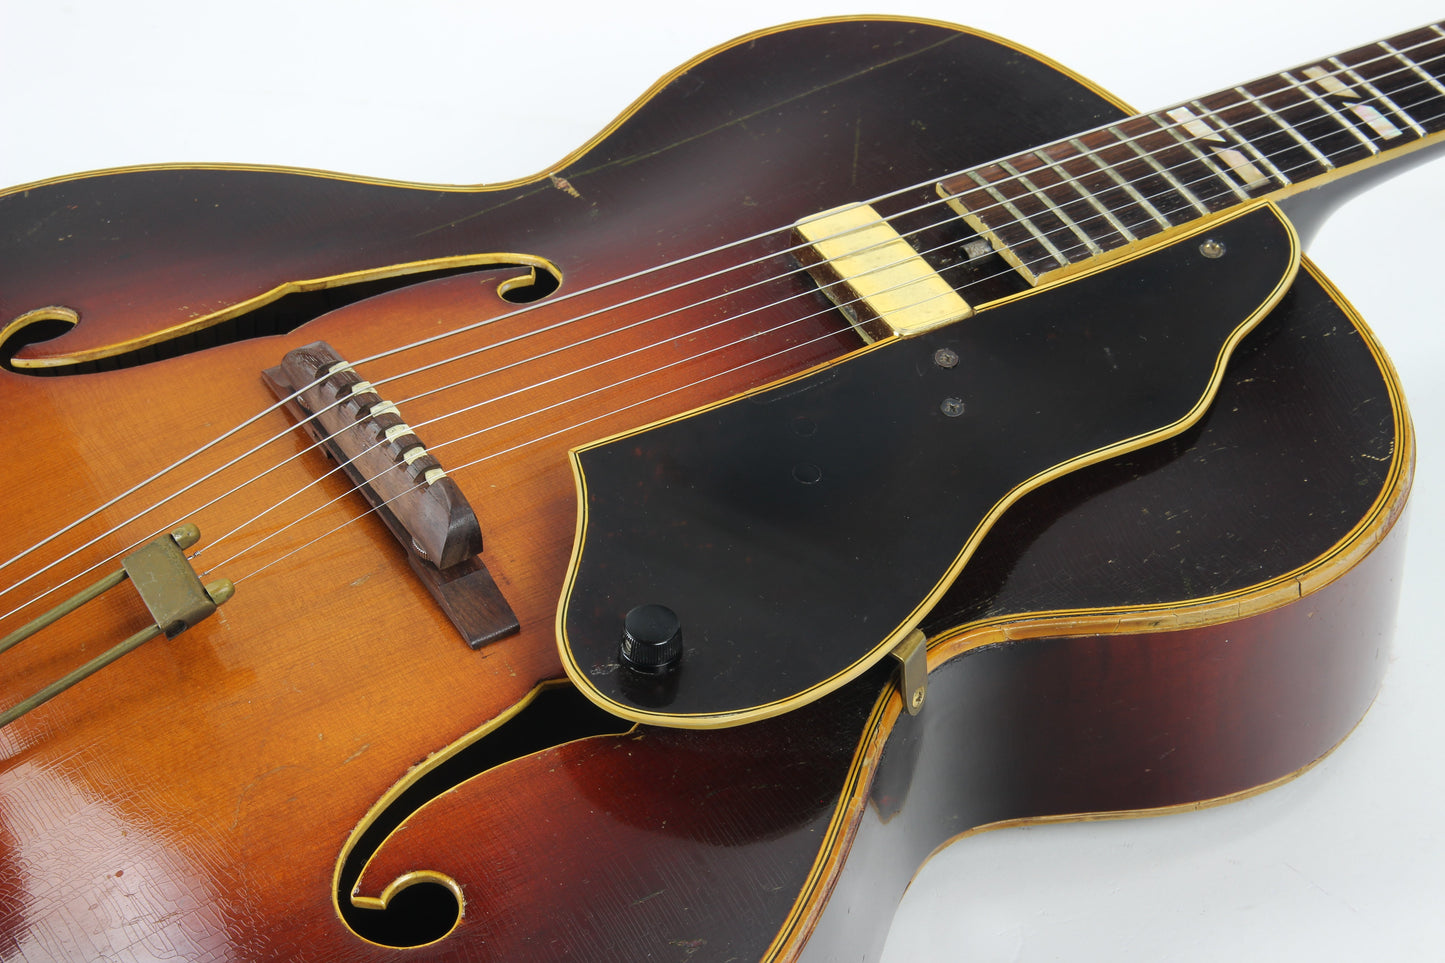 1930's Epiphone DeLuxe Archtop Acoustic Vintage Guitar - Floating Pickup, Custom Fretboard, Sounds EXCELLENT!